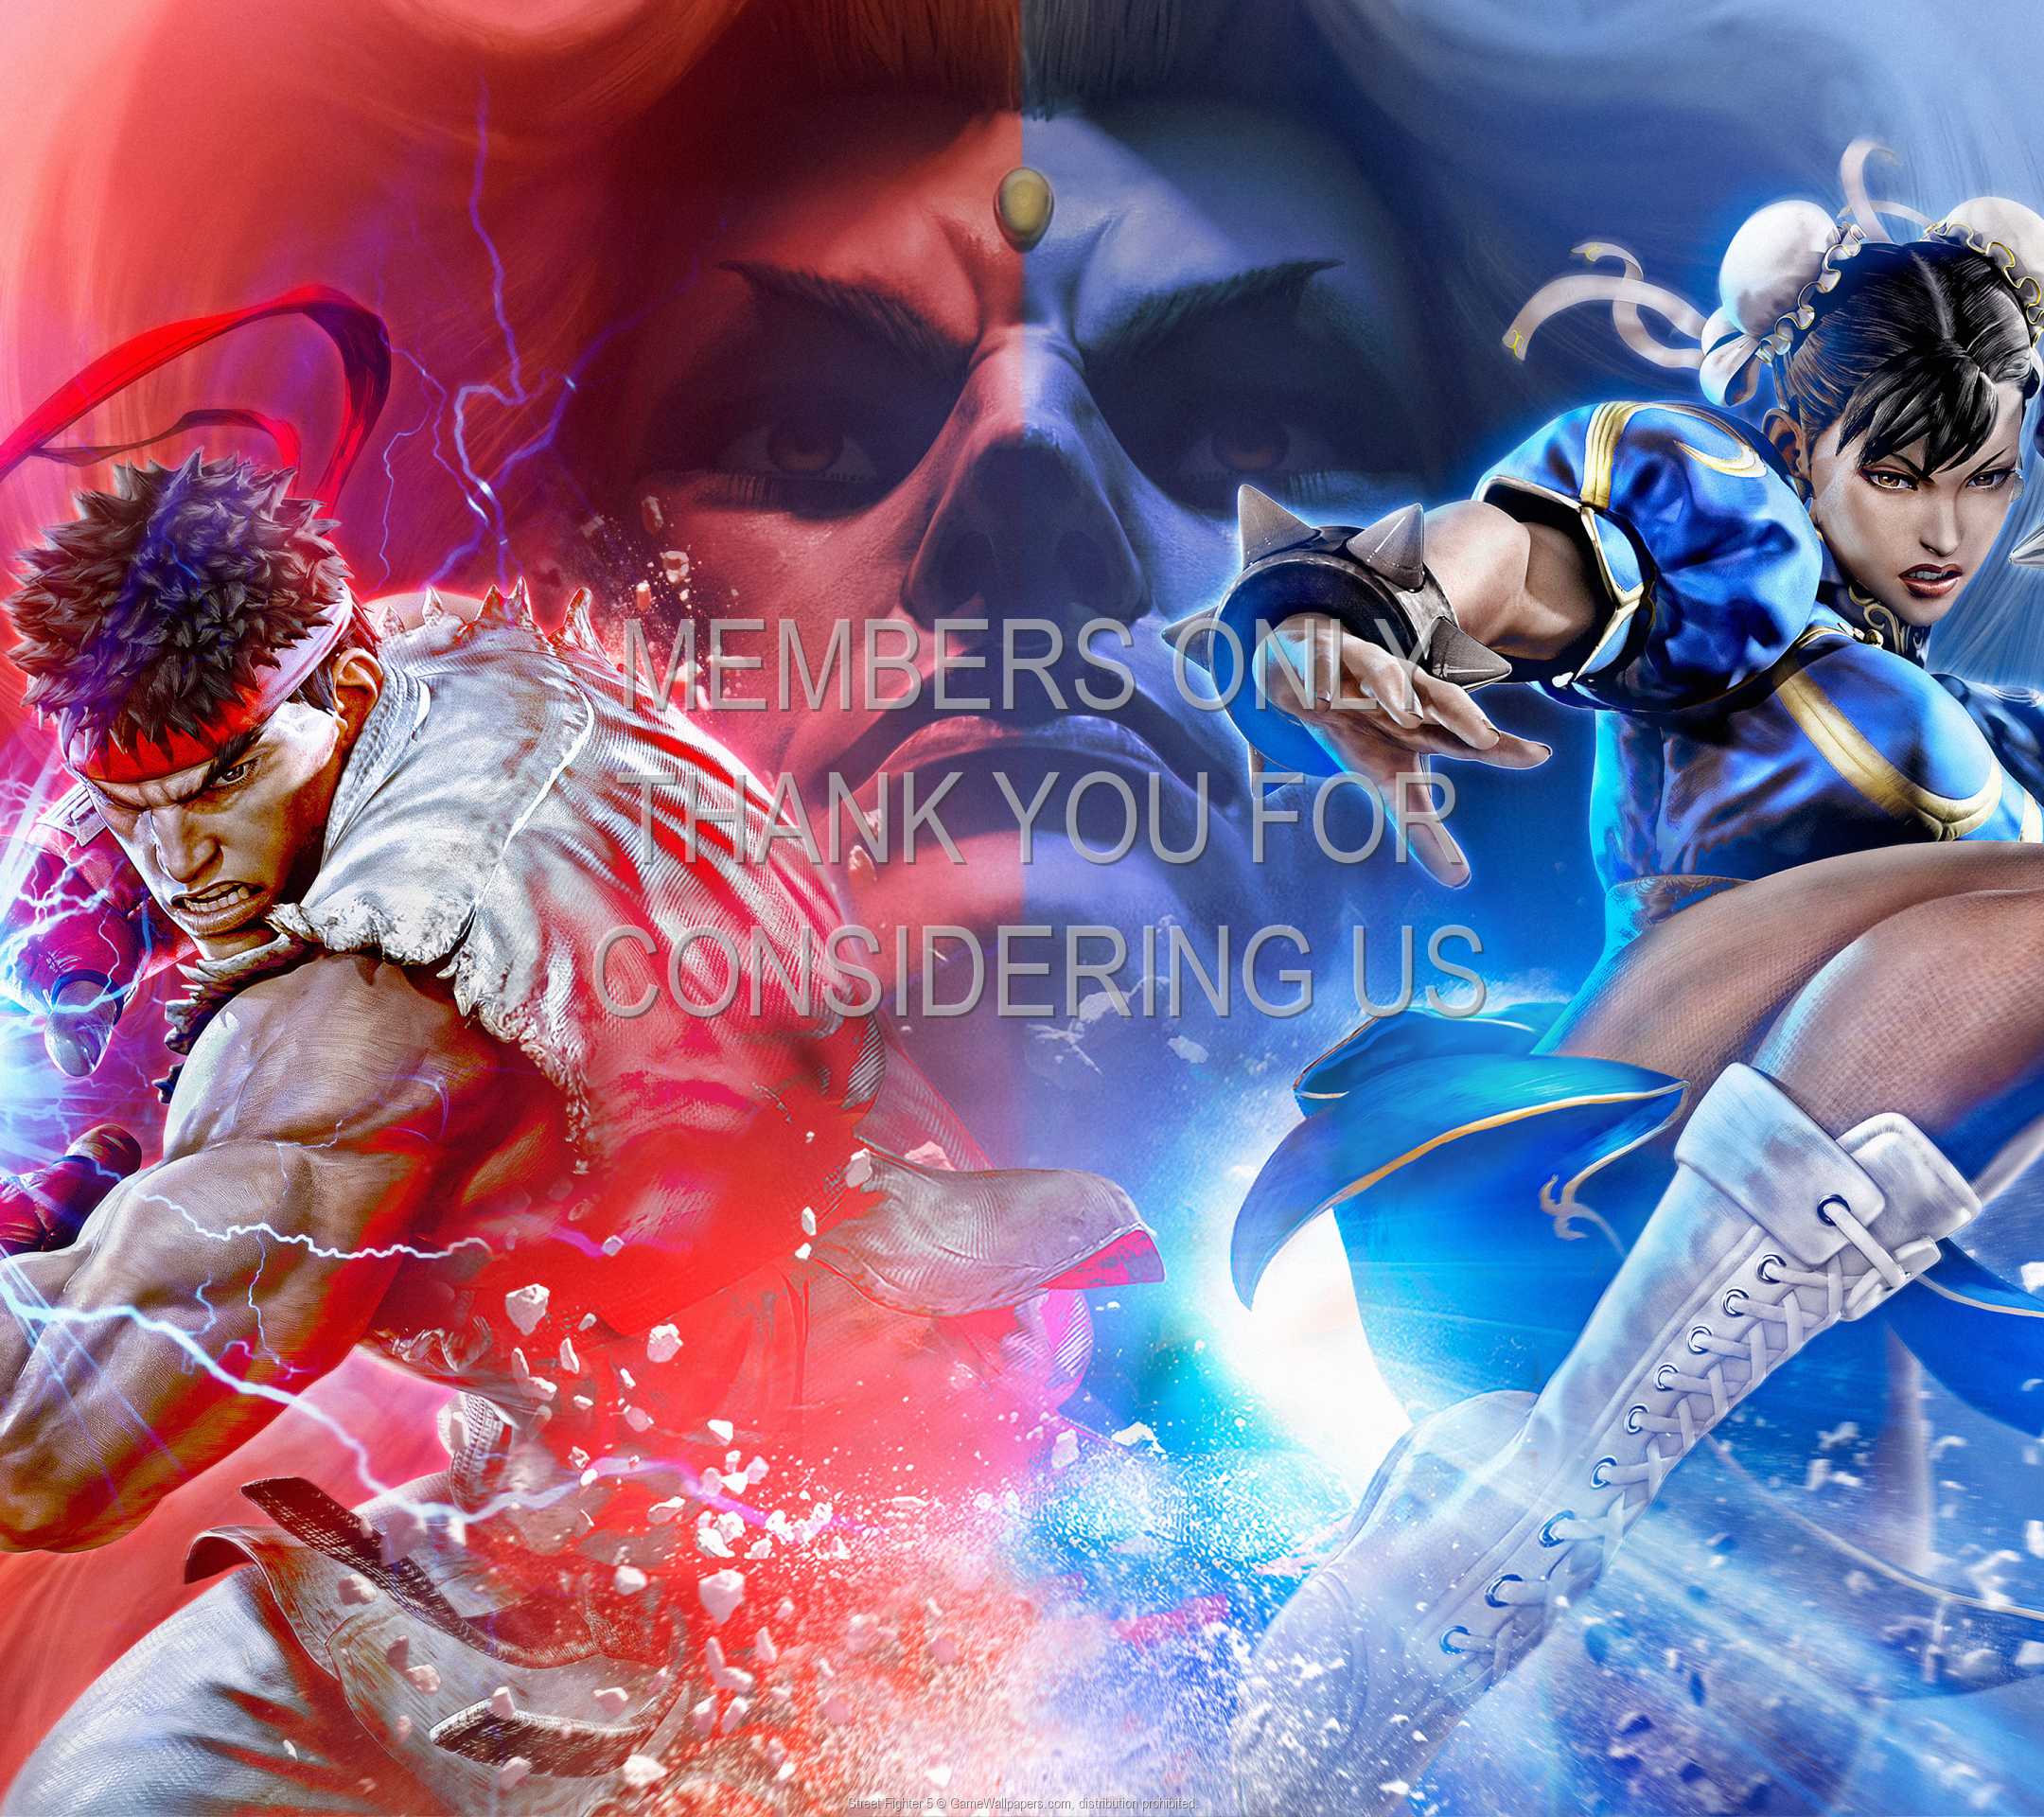 Street Fighter 5 1080p%20Horizontal Mobile wallpaper or background 08